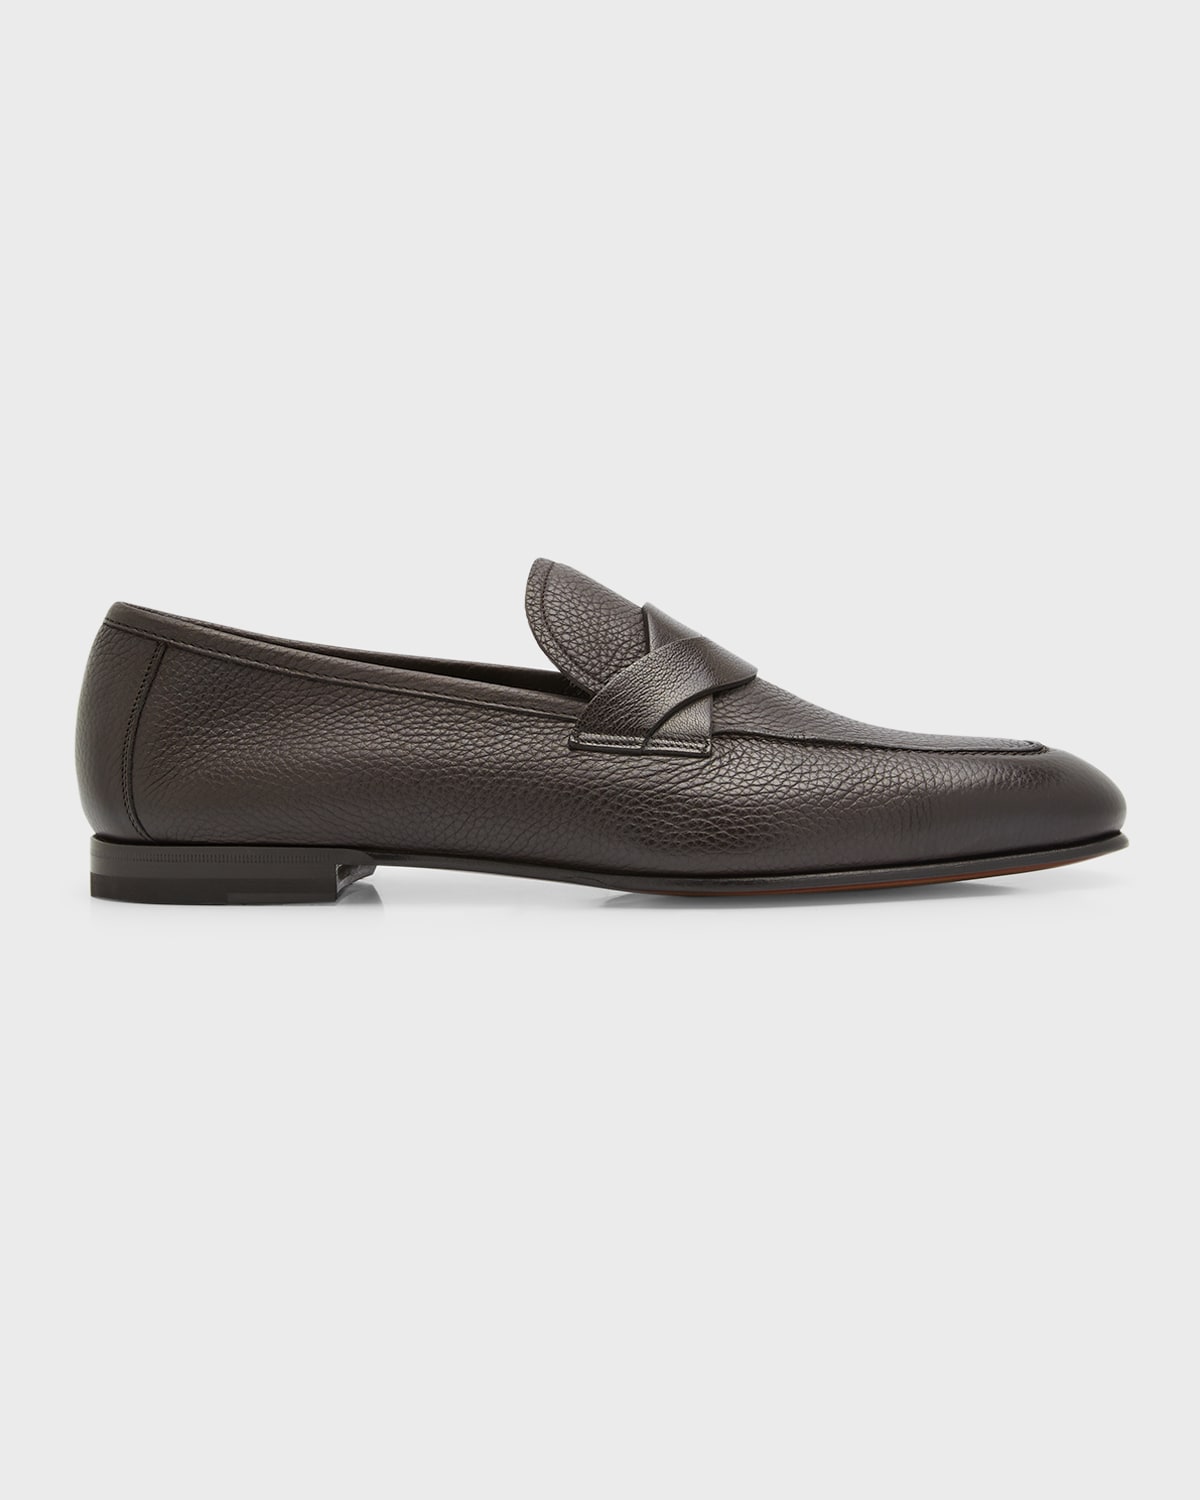 Tom Ford Grained Leather Loafers In Chocolate